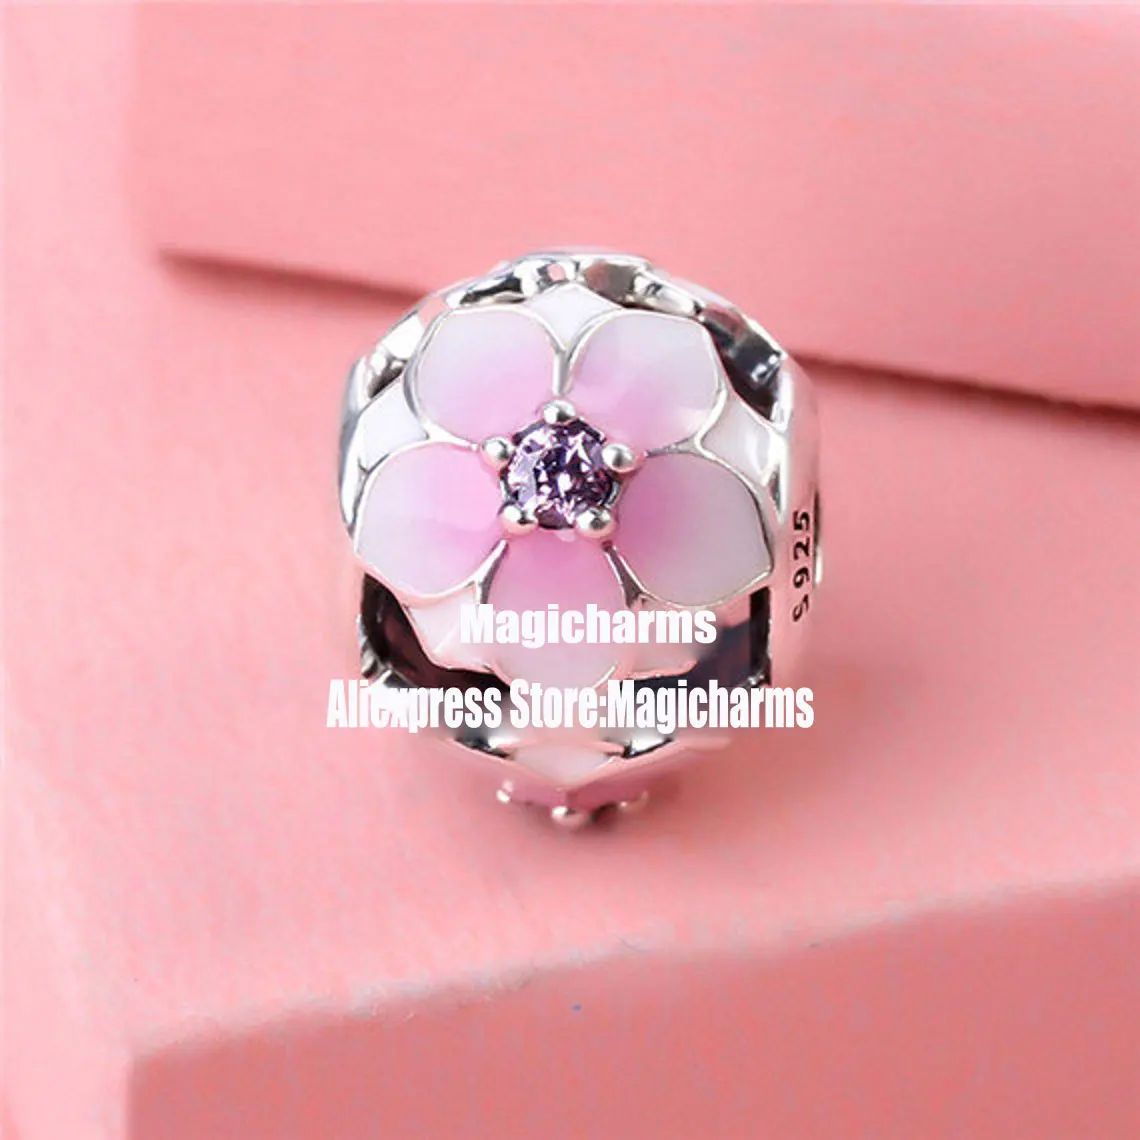 

925 Sterling Silver Magnolia Bloom With Pink Enamel and Cz Charm Bead Fits All European Pandora Bracelets Necklaces